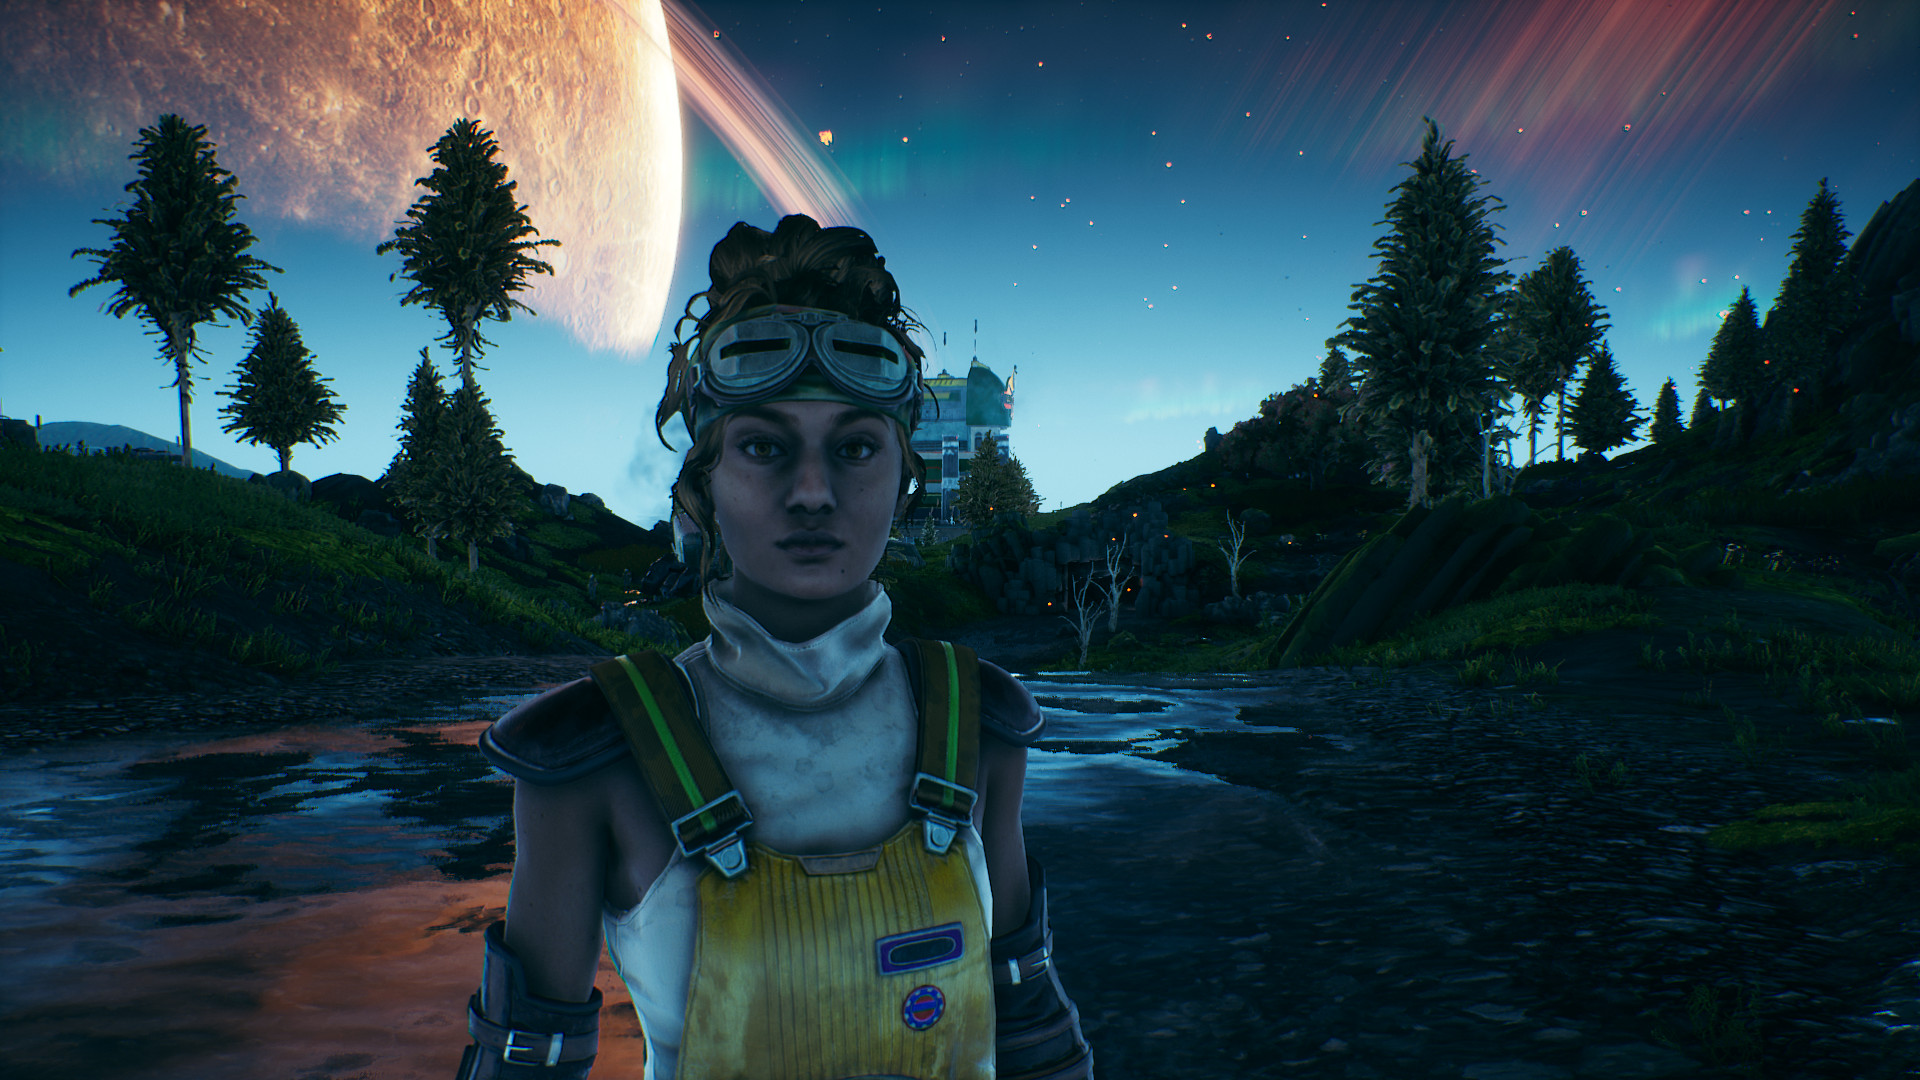 Thoughts: The Outer Worlds